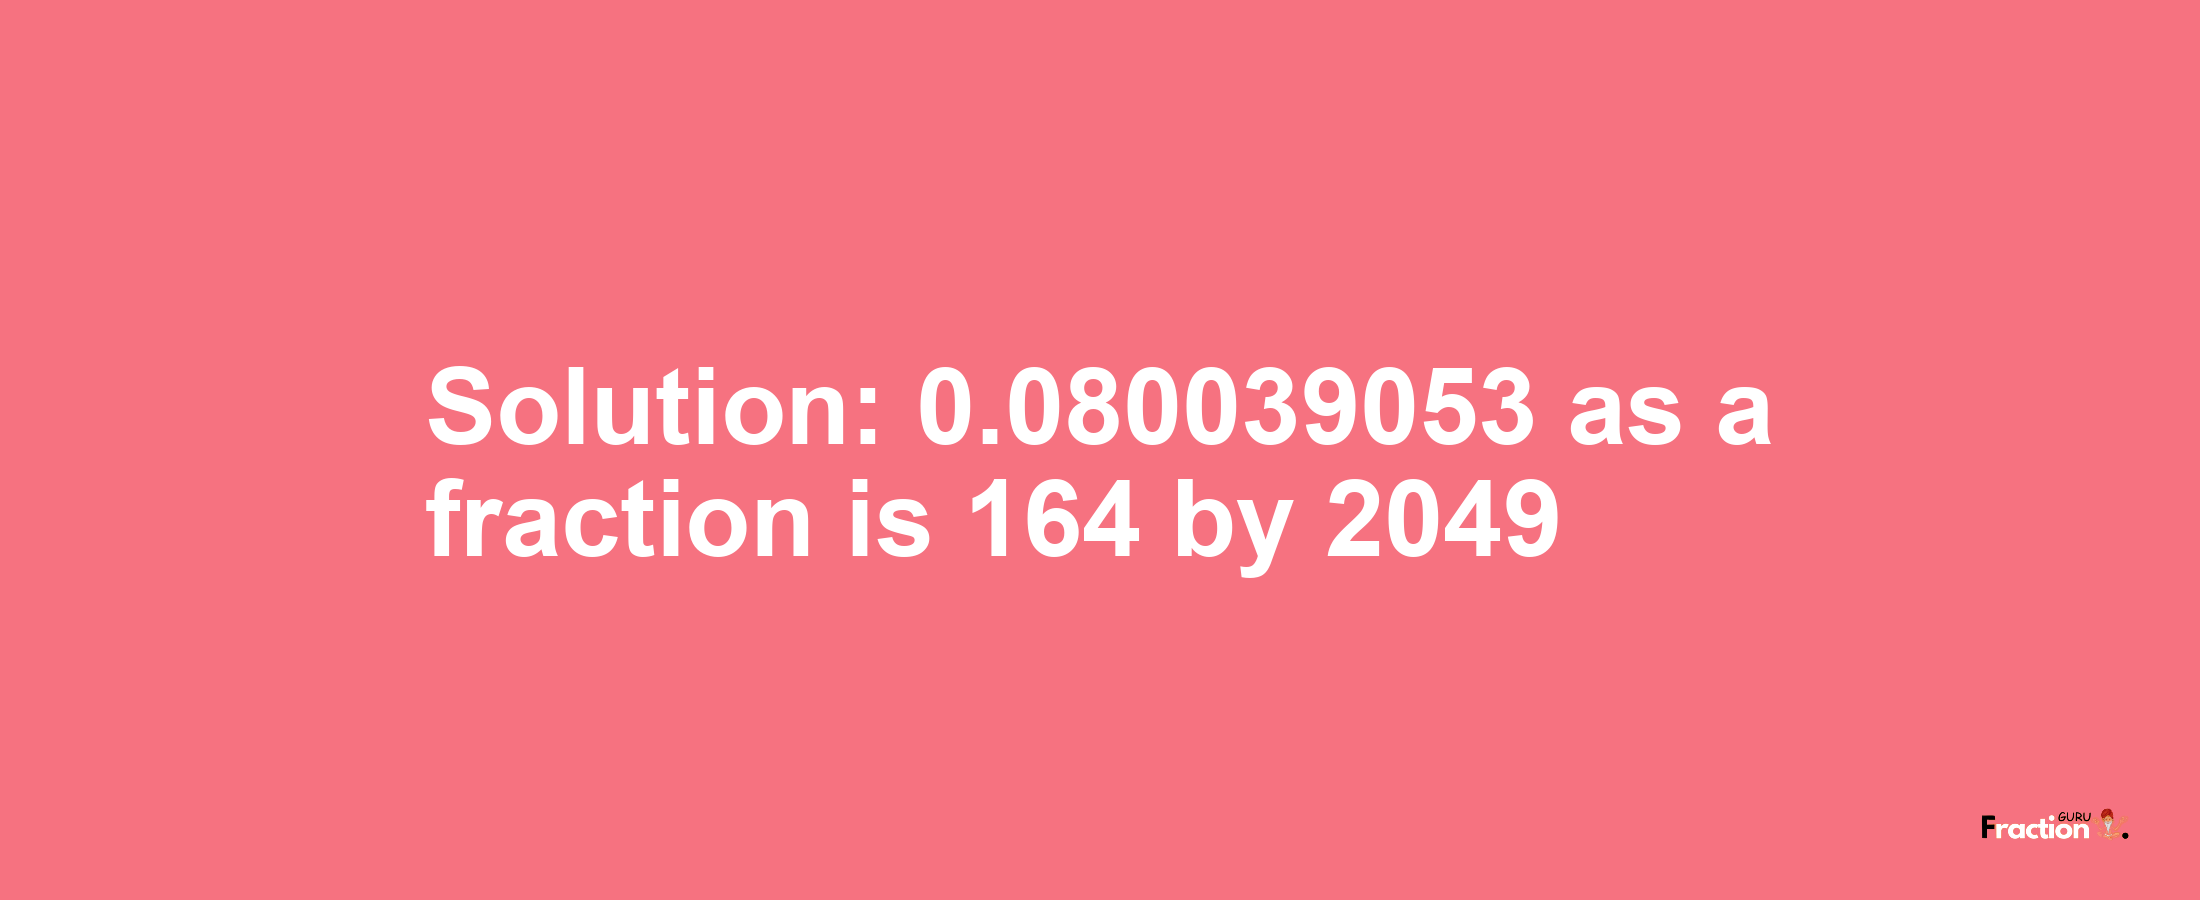 Solution:0.080039053 as a fraction is 164/2049